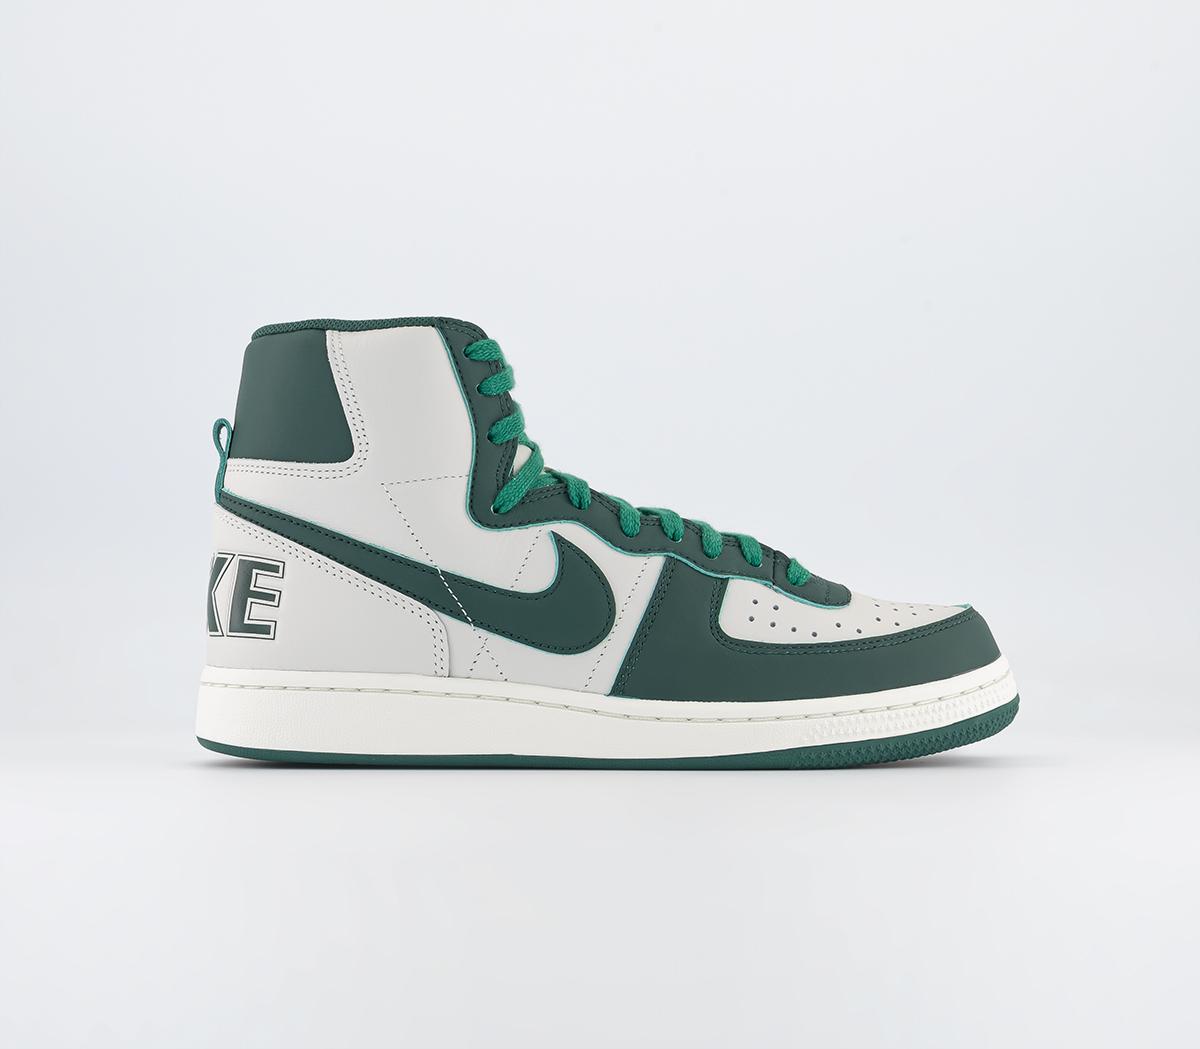 NikeTerminator High TrainersSwan Noble Green Sail Washed Green